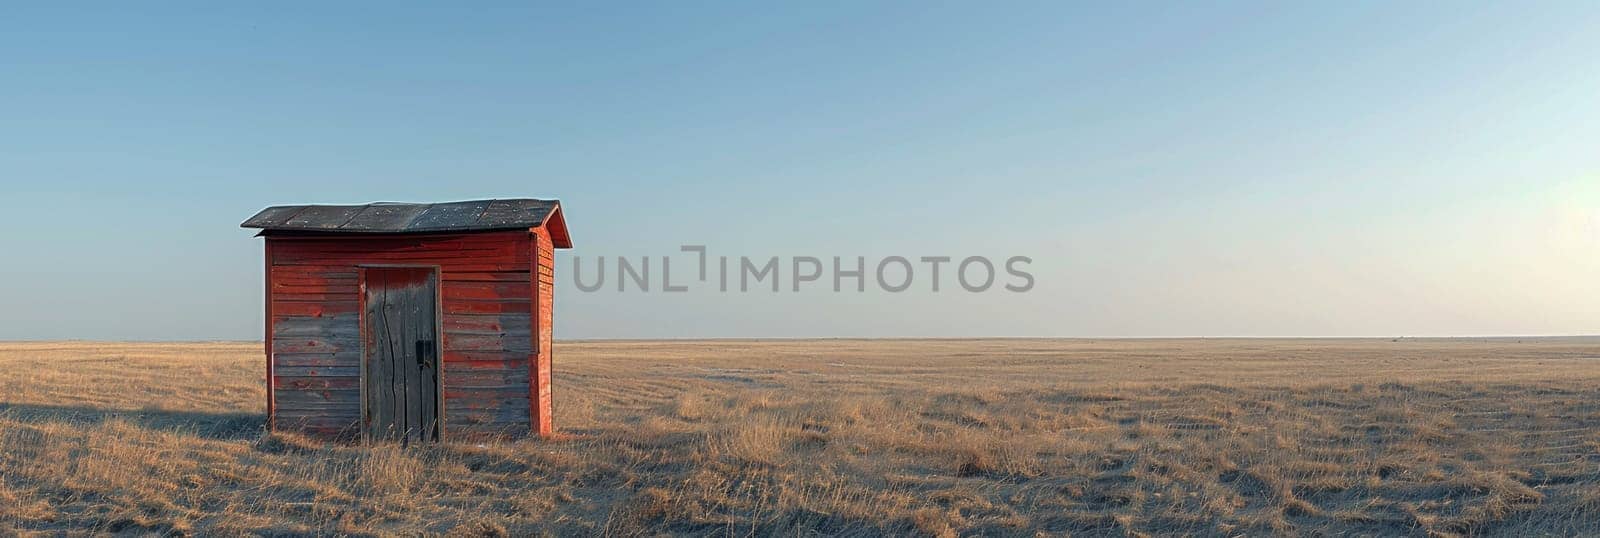 A small outhouse stands alone in the middle of a vast, golden wheat field under a clear blue sky on a sunny day.